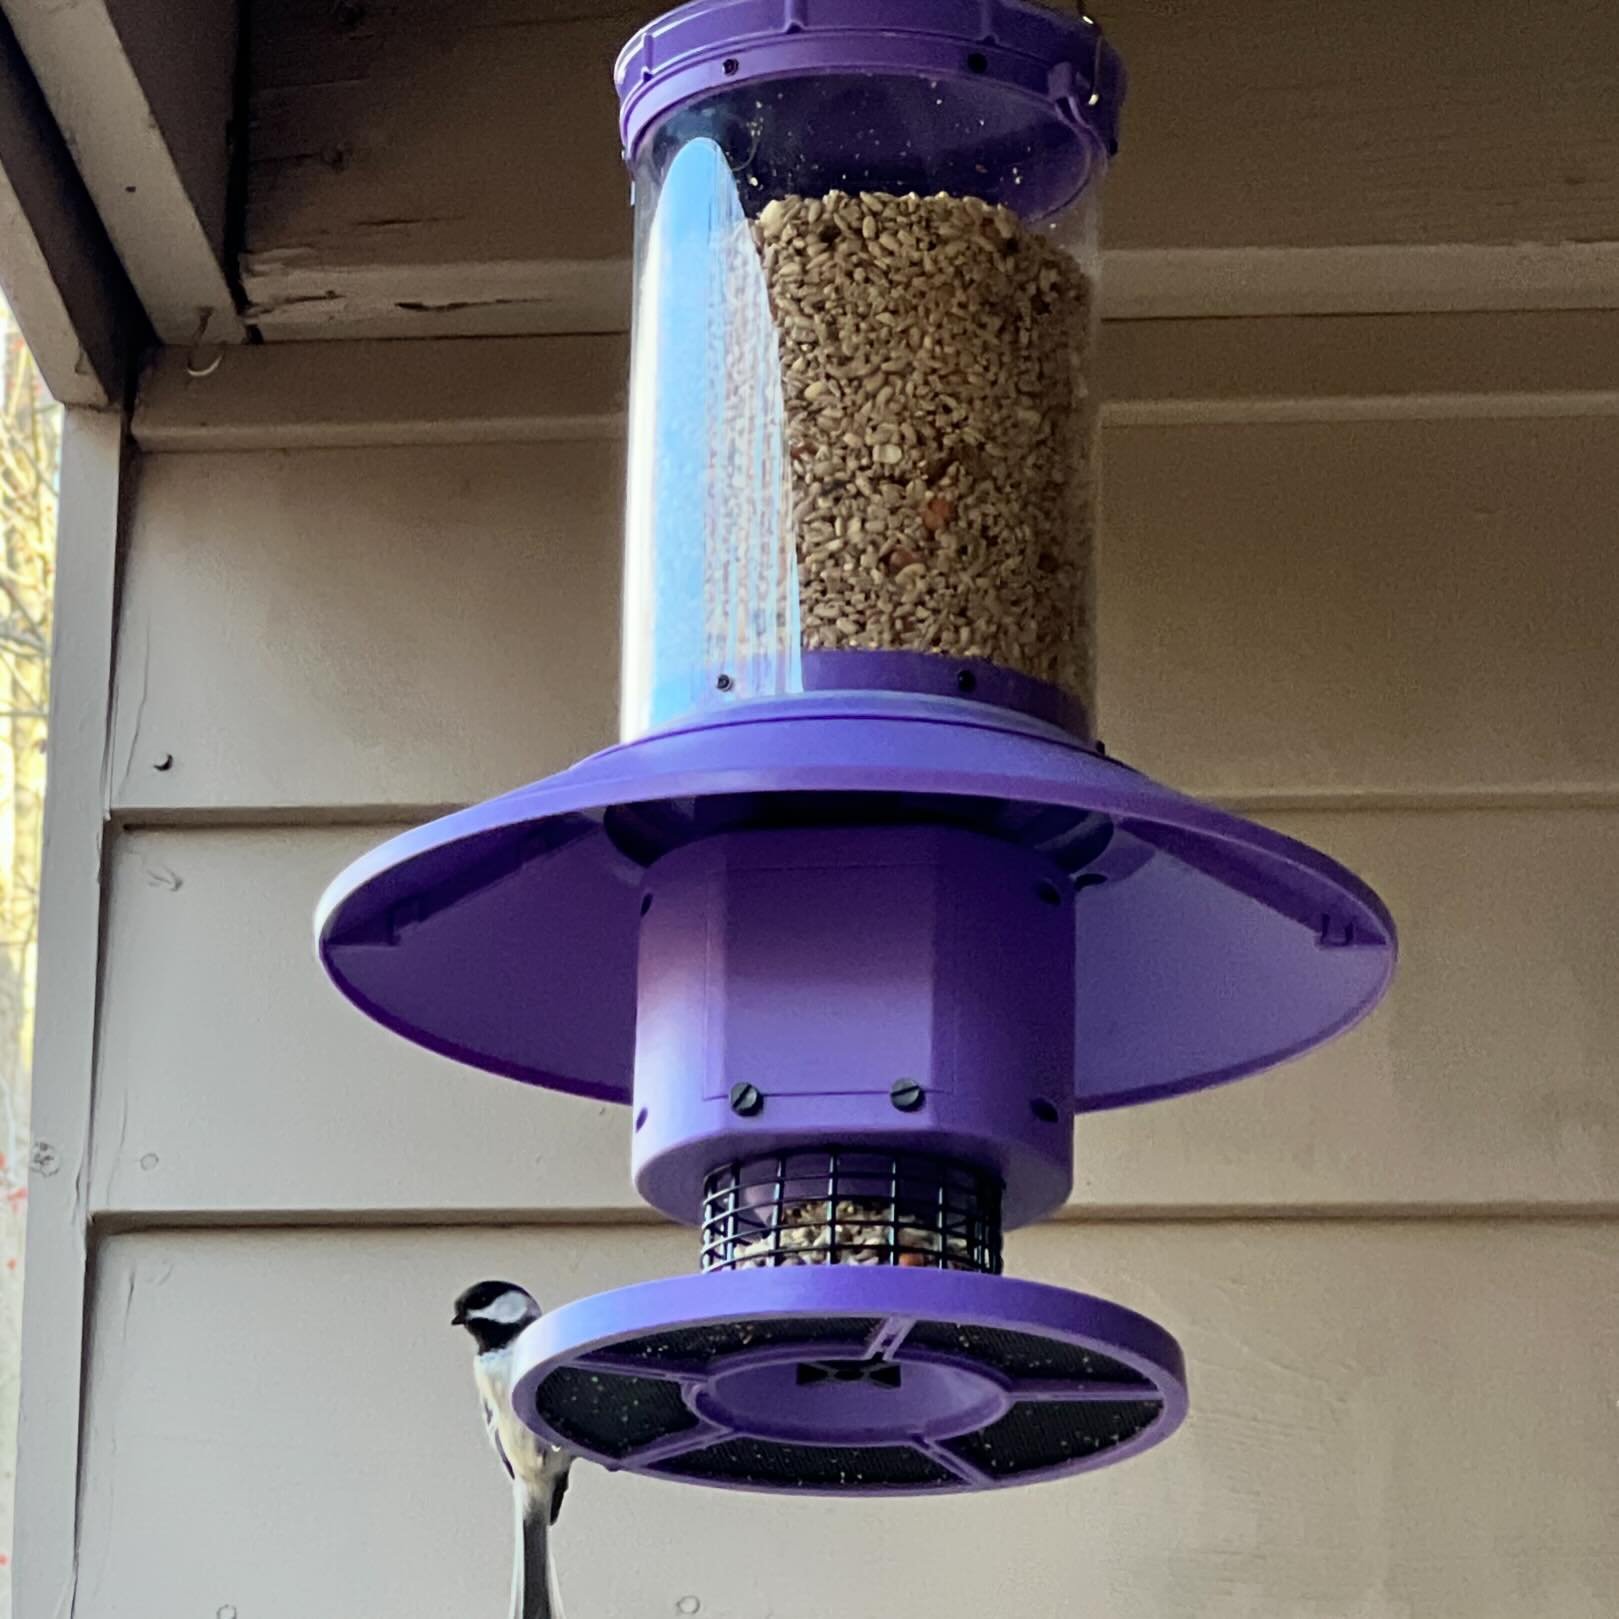 I love my bougie purple auto feeder from @wingscapes. Four times a day it deposits food out onto the tray. This not only indulges my laziness but also keeps the house sparrows from just eating it until the feeder is empty. It gives all the other bird